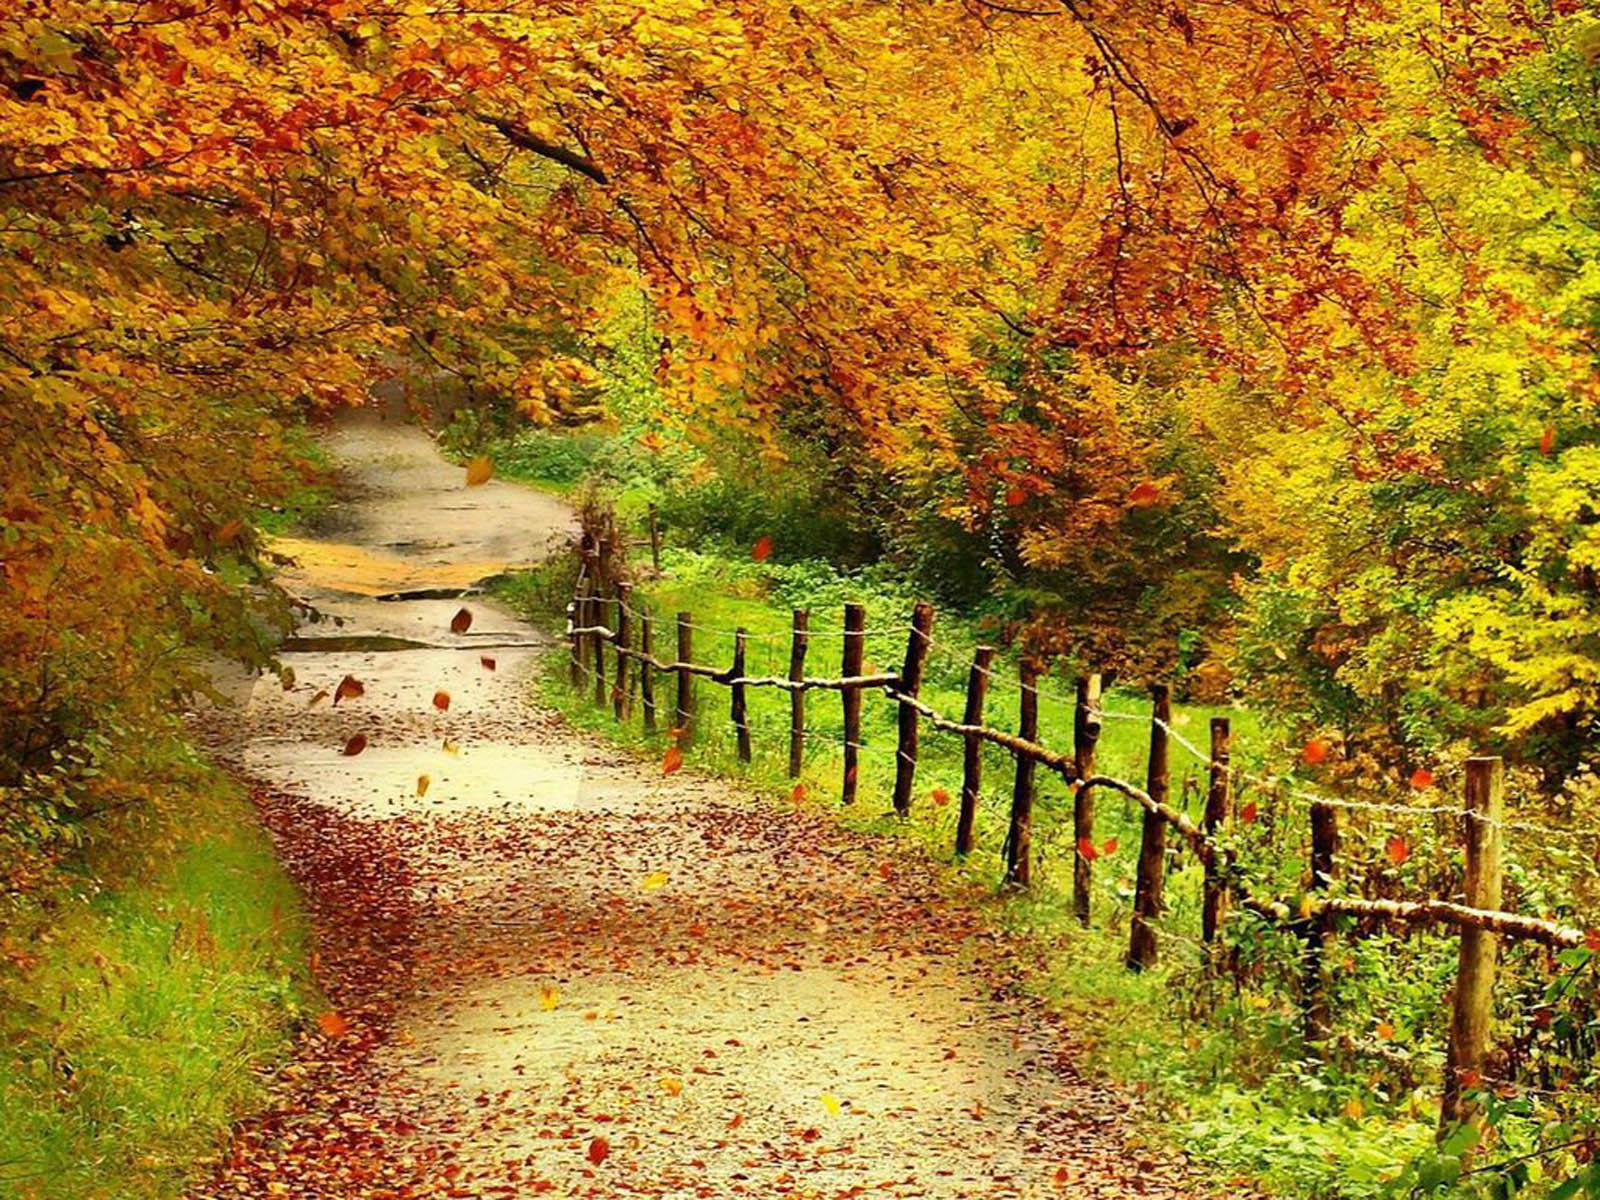 ... Autumn Scenery Wallpapers,Backgrounds, Photos, Images and Pictures for